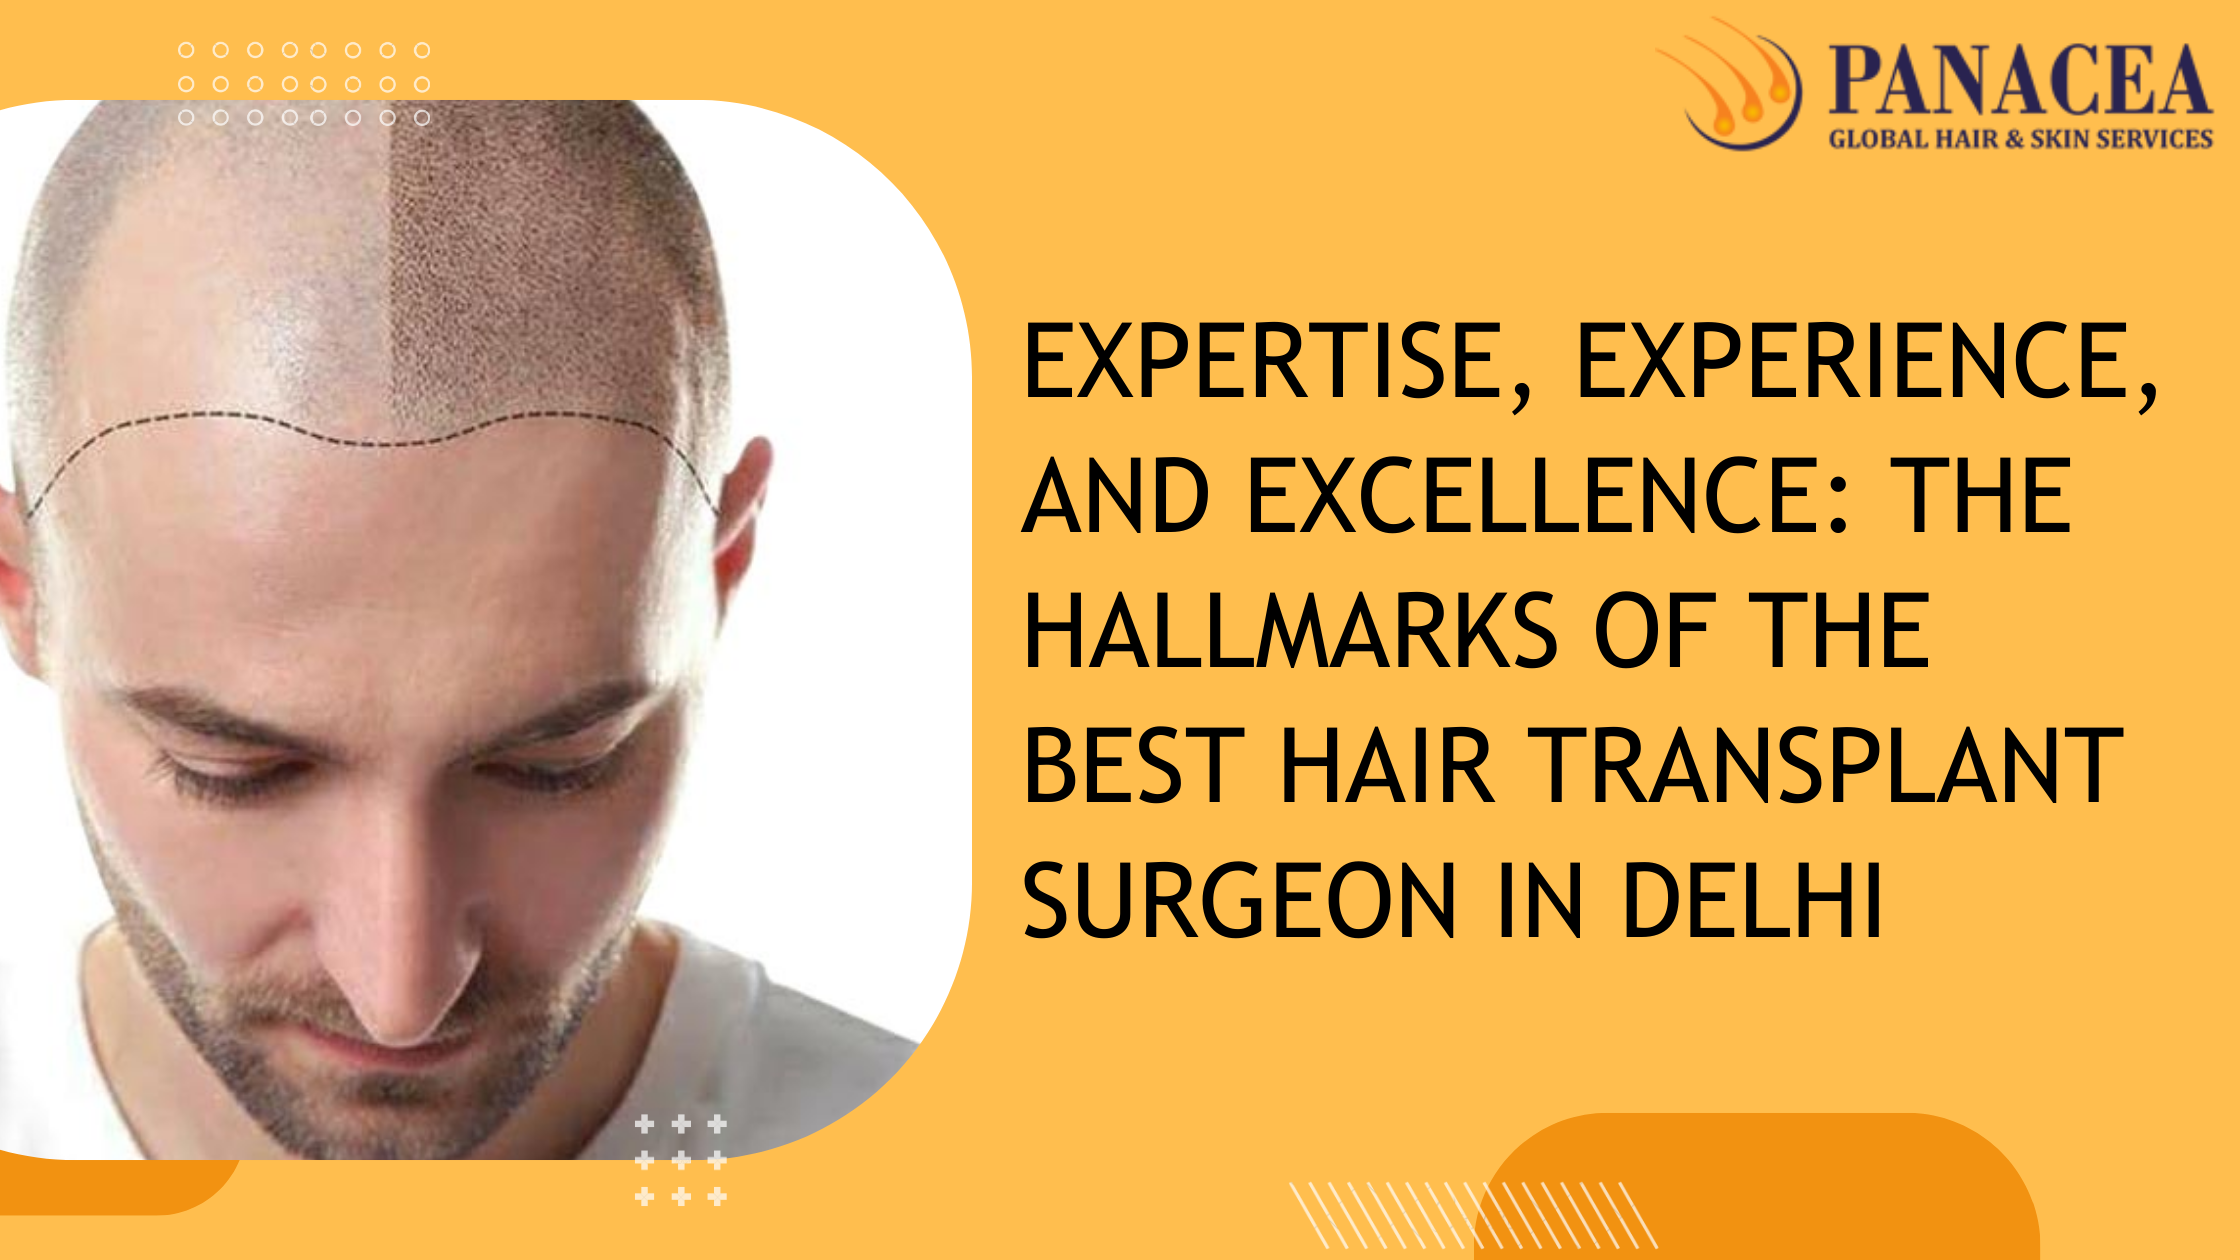 Experience The Hallmarks of the Best Hair Transplant Surgeon in Delhi